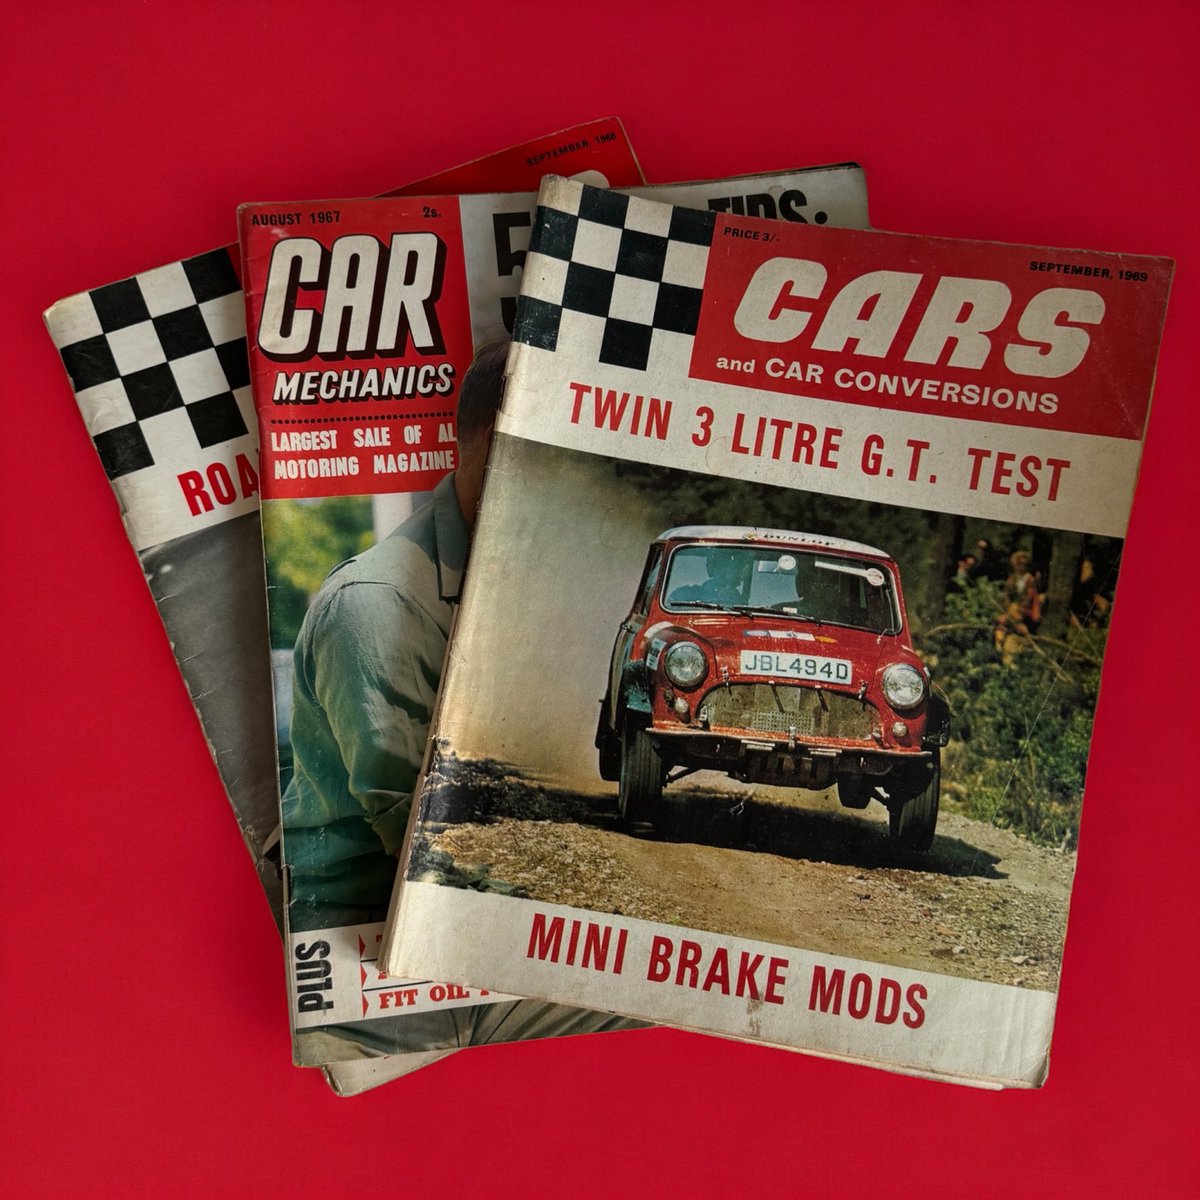 The incredible gift of some fabulous 1960s 'Triple C' and Car Mechanics mags here at HQ has given us a sunny afternoon of perfect reading. It's also got us thinking... 🤔 What we're, or indeed are, your 'go to' print tiyles over the years? What's been fuelling your passion?